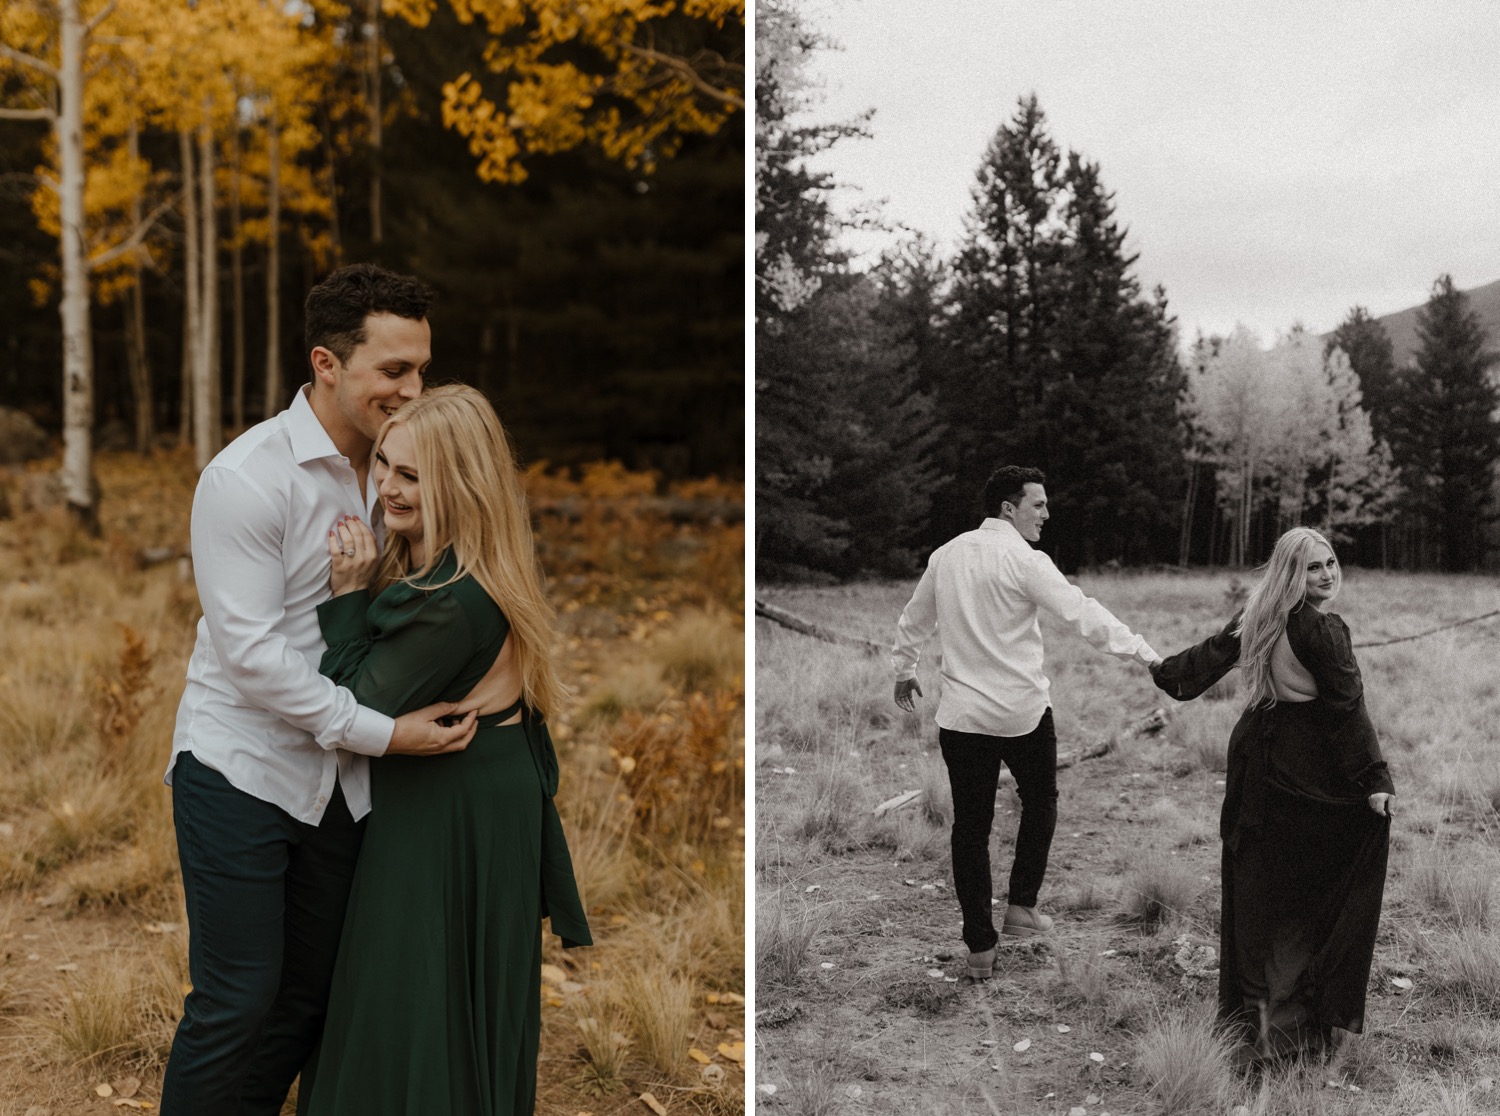 Fall Forest Engagement Photos in Flagstaff, Arizona